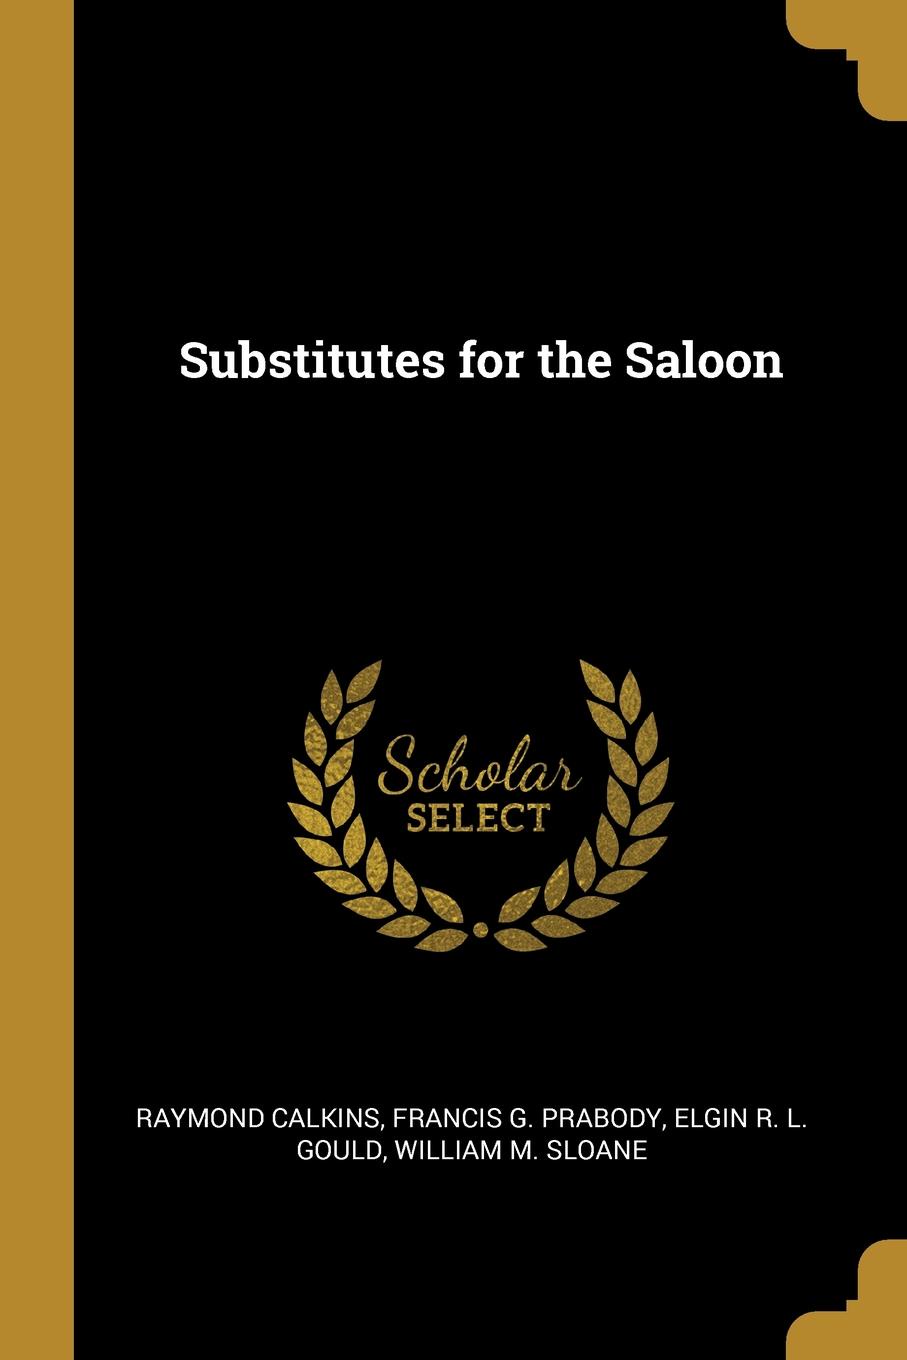 Substitutes for the Saloon